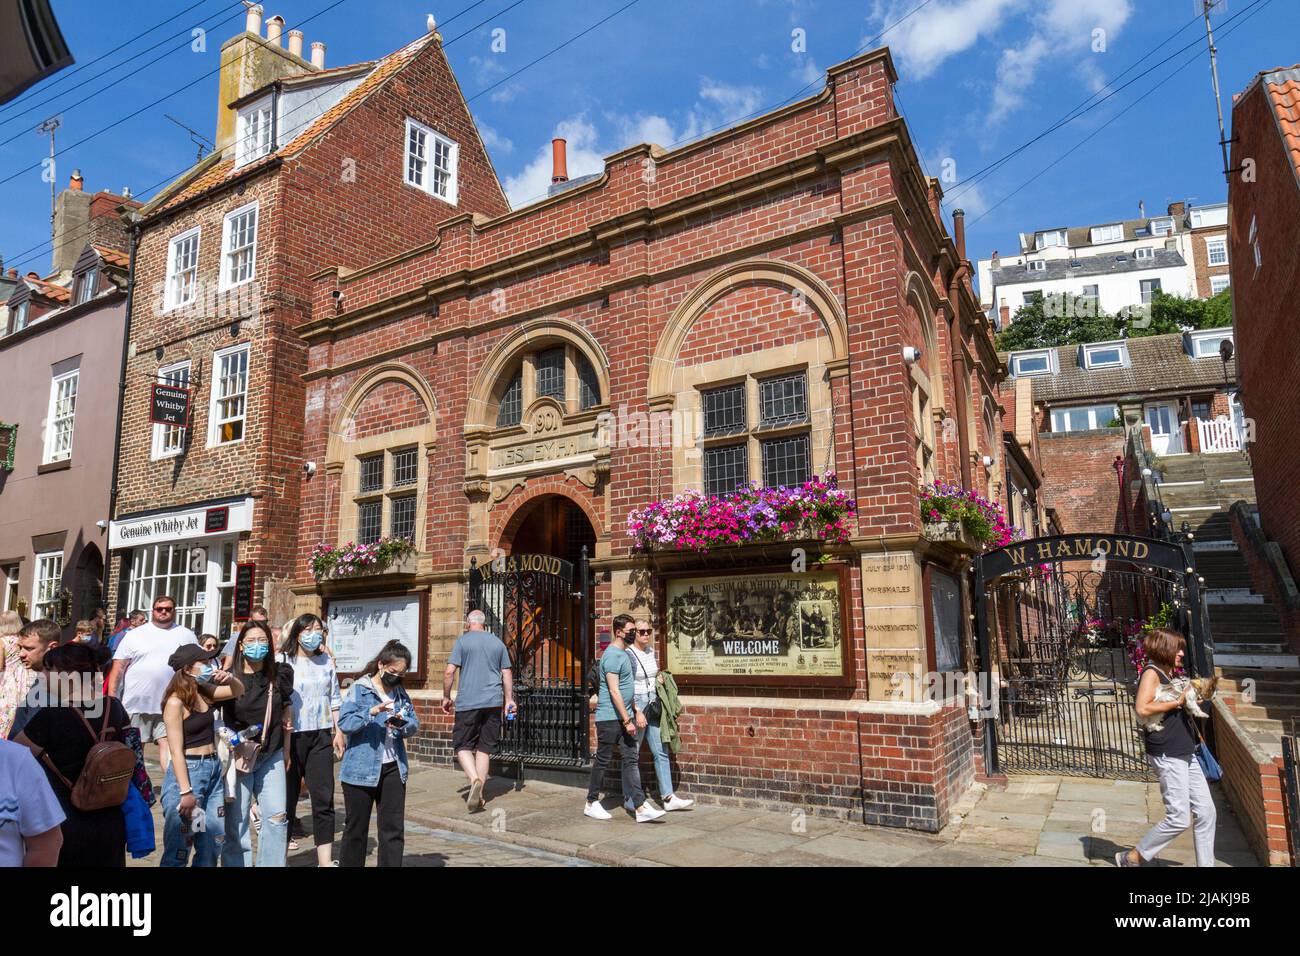 Albert's Eatery & Museum of Whitby Jet a Wesley Hall in Henrietta Street Whitby, North Yorkshire, Regno Unito. Foto Stock